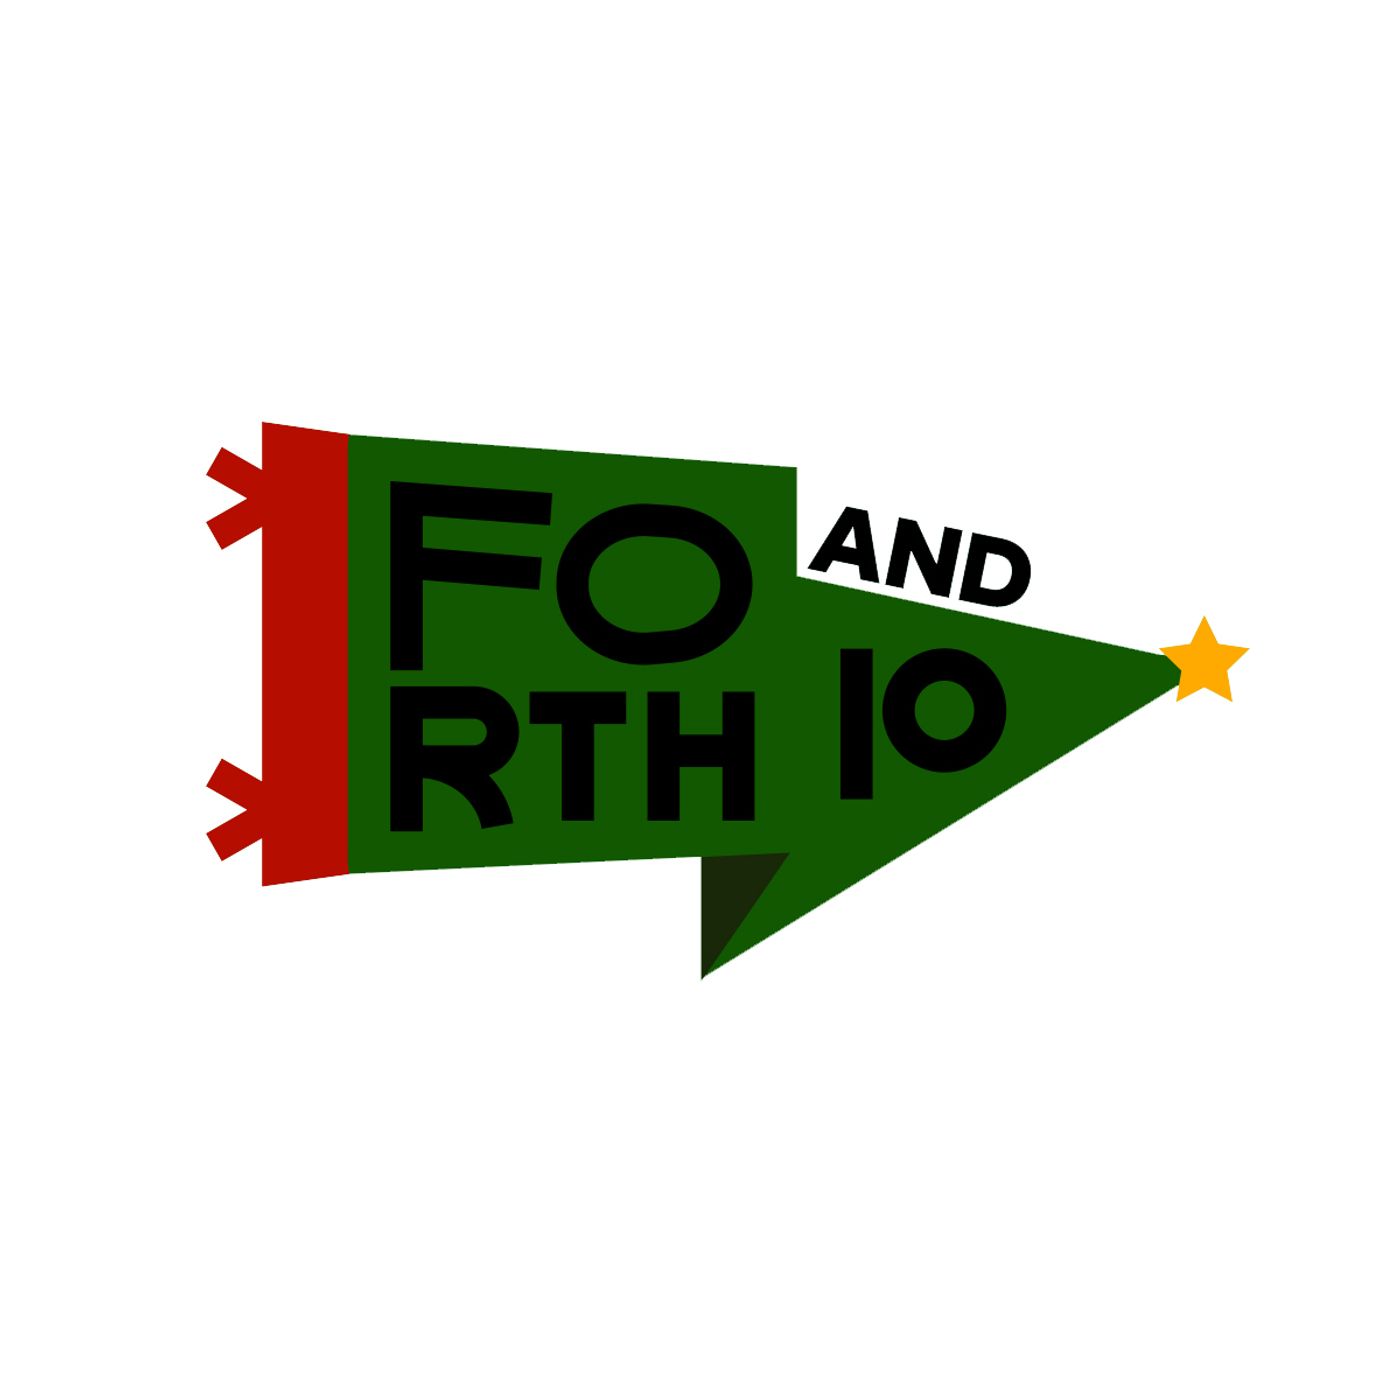 Forth and Ten's Annual Christmas Spectacular